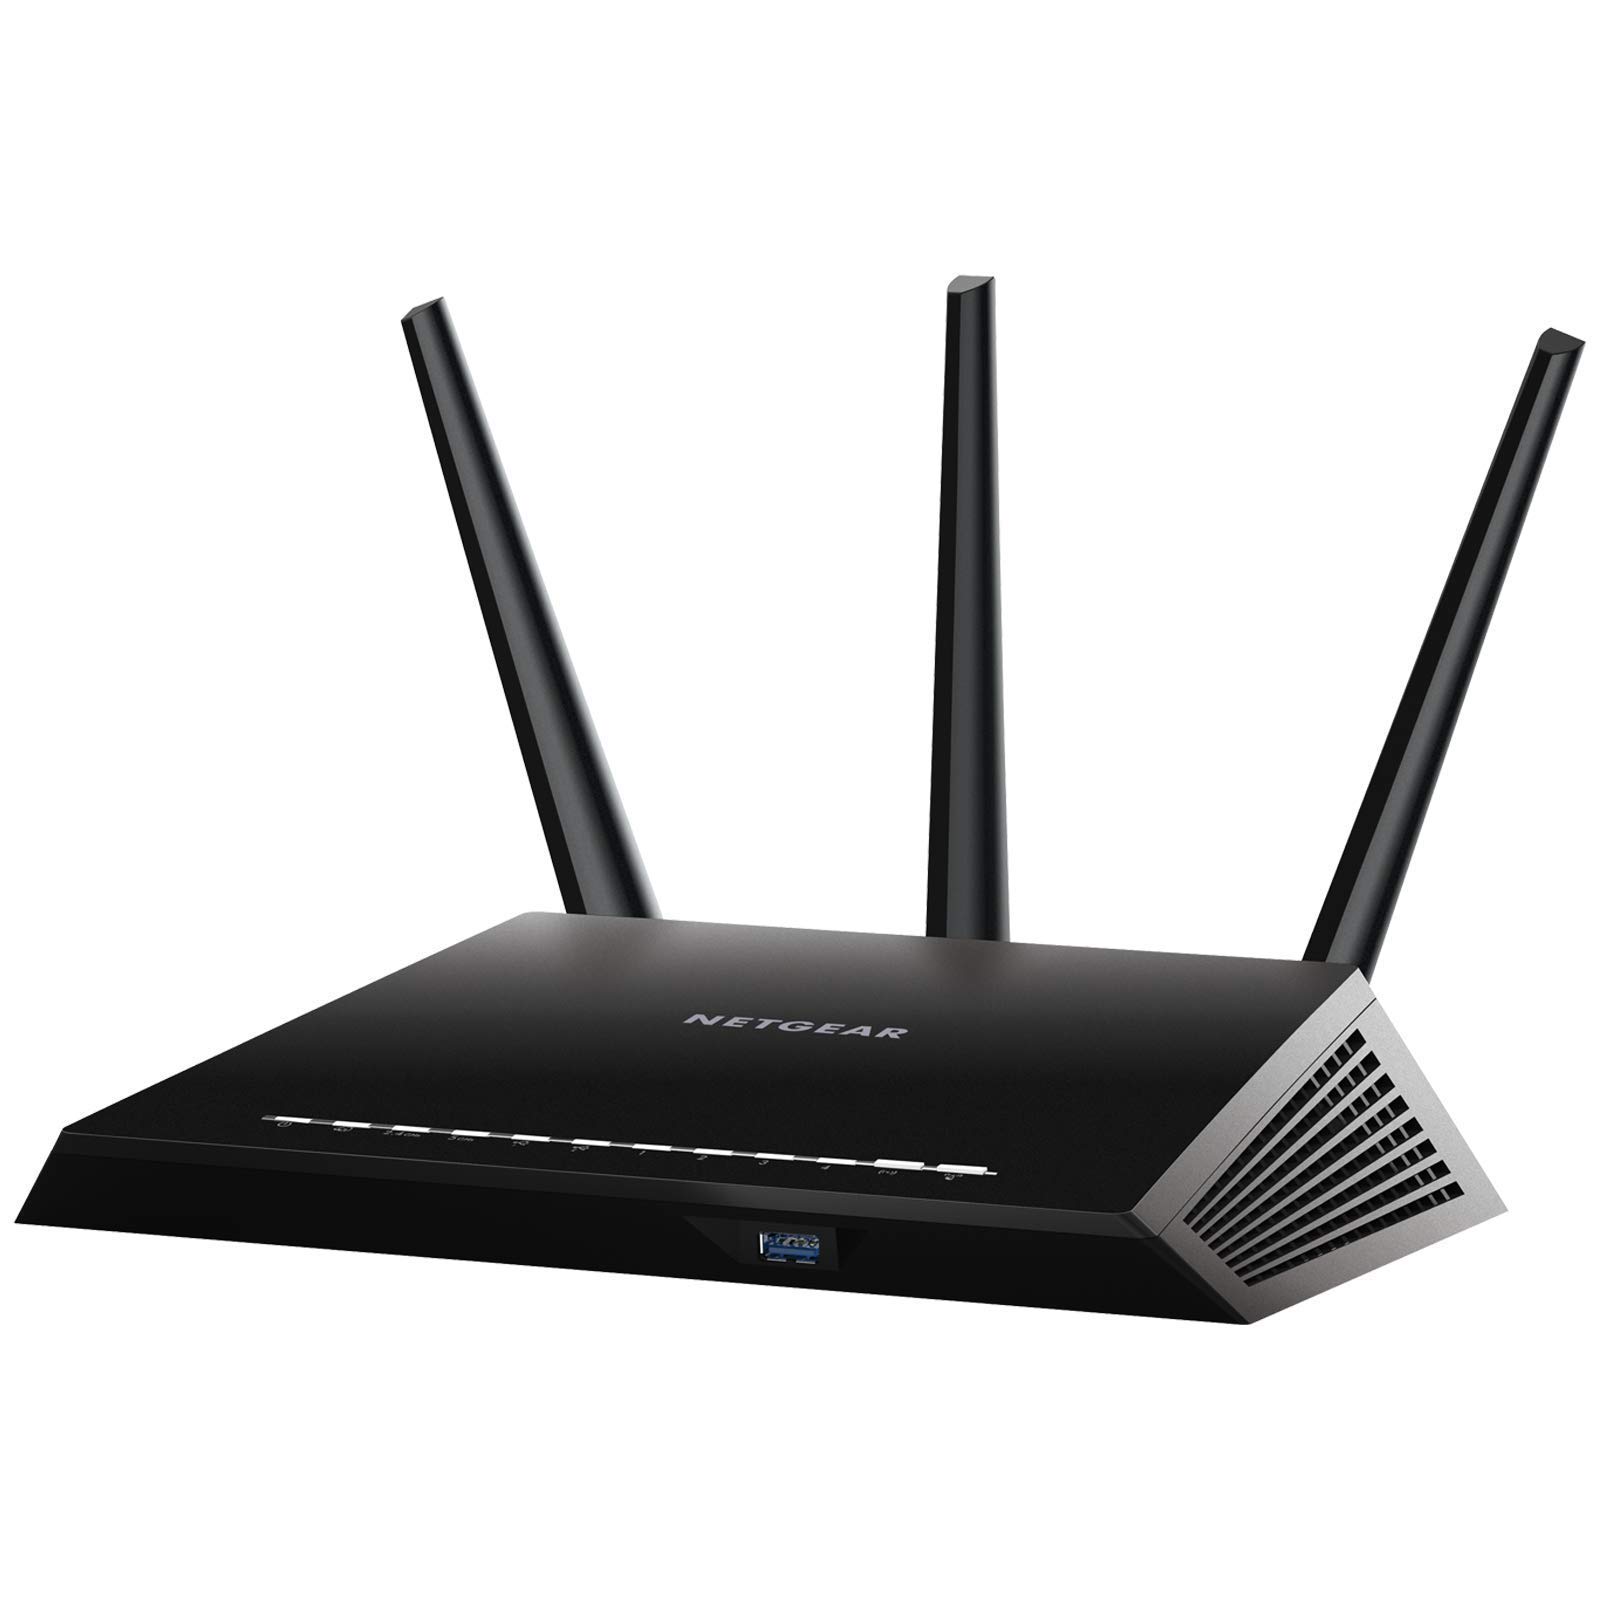 NETGEAR Nighthawk Smart WiFi Router (R7000P) - AC2300 Wireless Speed (up to 2300 Mbps) | Up to 2000 sq ft Coverage & 35 Devices | 4 x 1G Ethernet and 2 USB Ports, | Armor Security (Renewed)